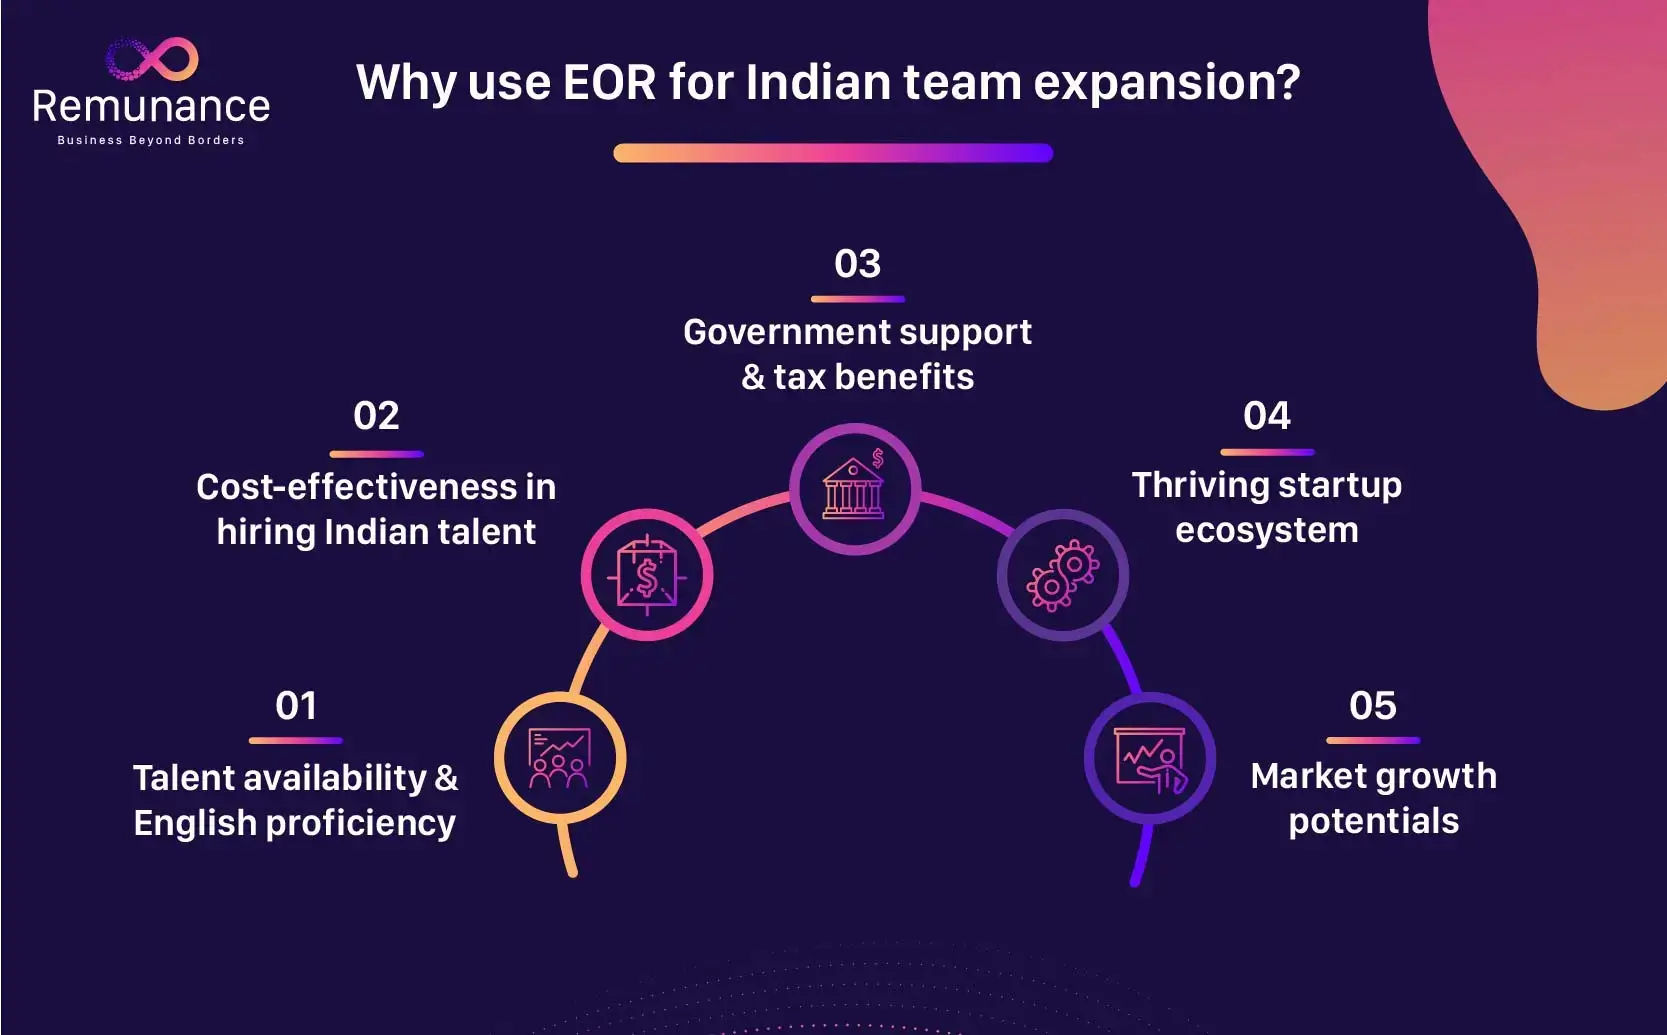 Why Do You Need EOR for Business Operations in India?